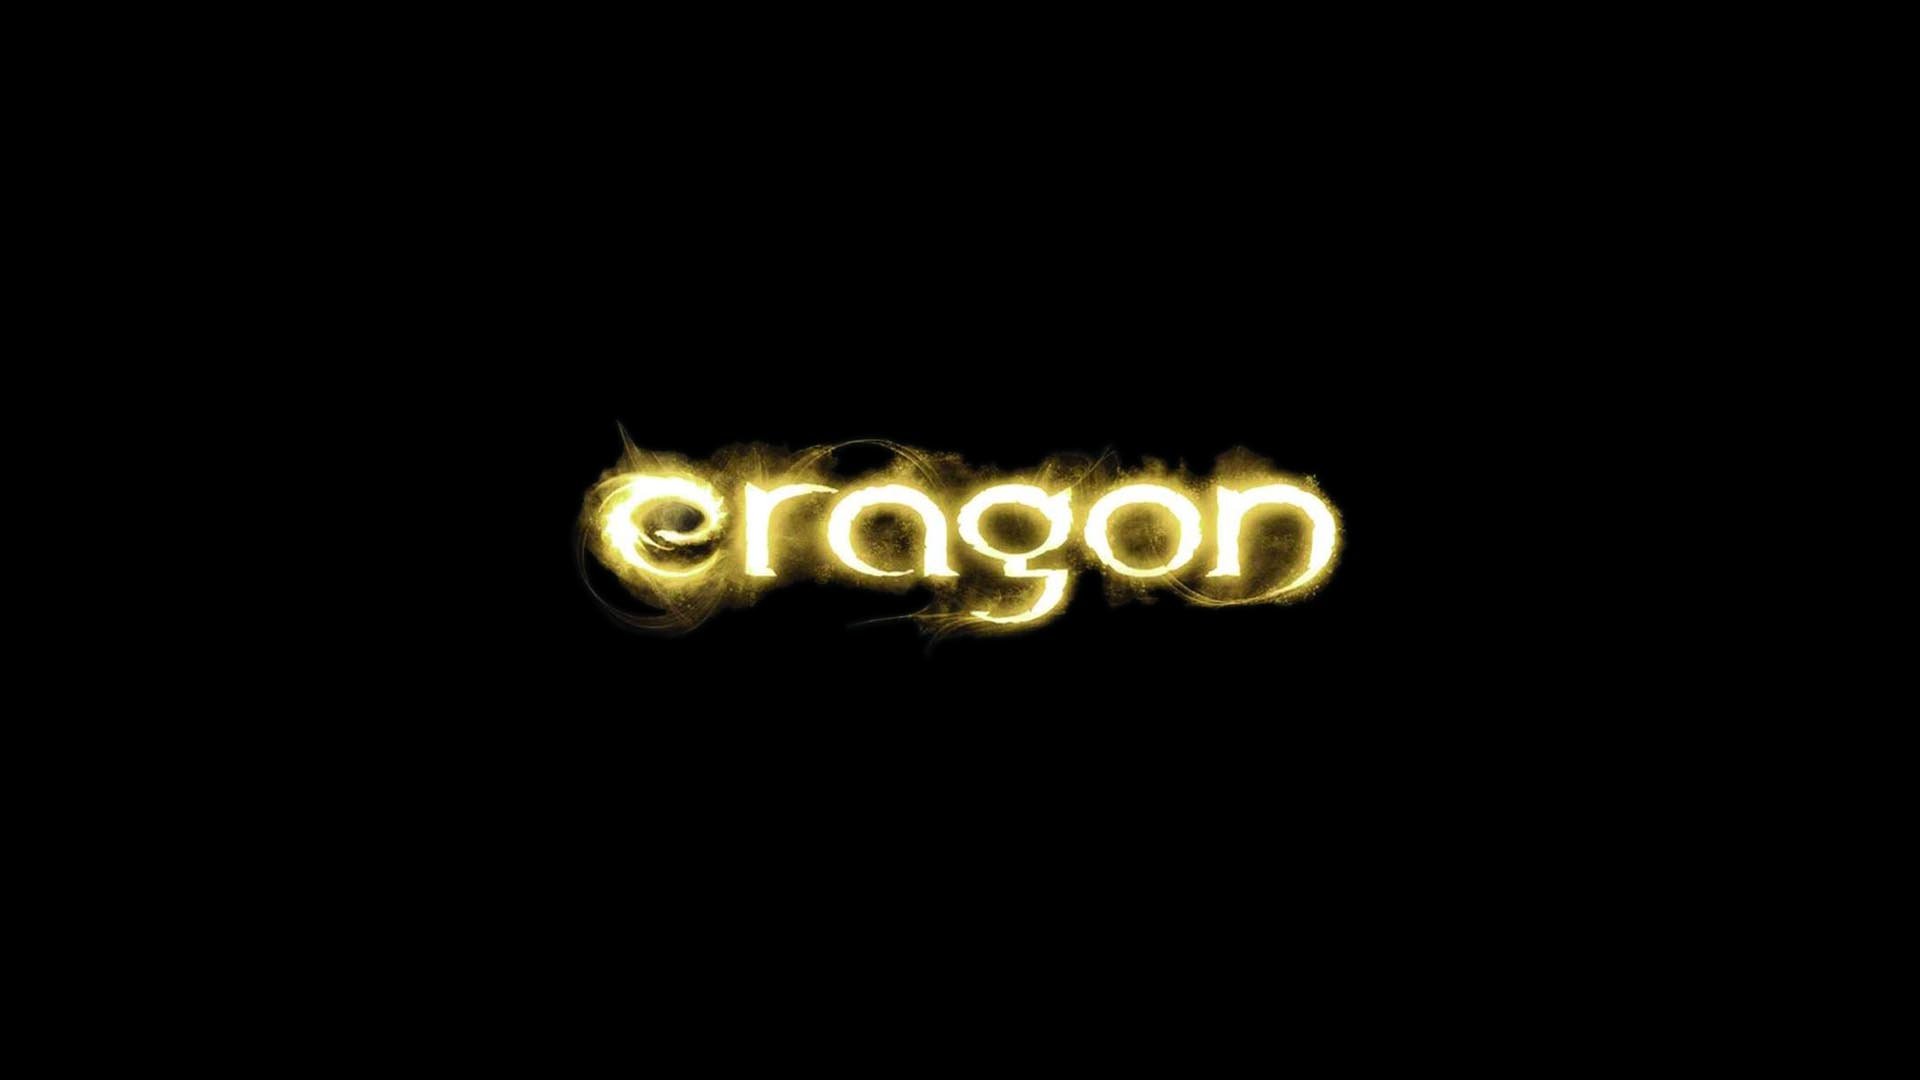 Awesome Eragon free wallpaper ID:67229 for hd 1920x1080 computer